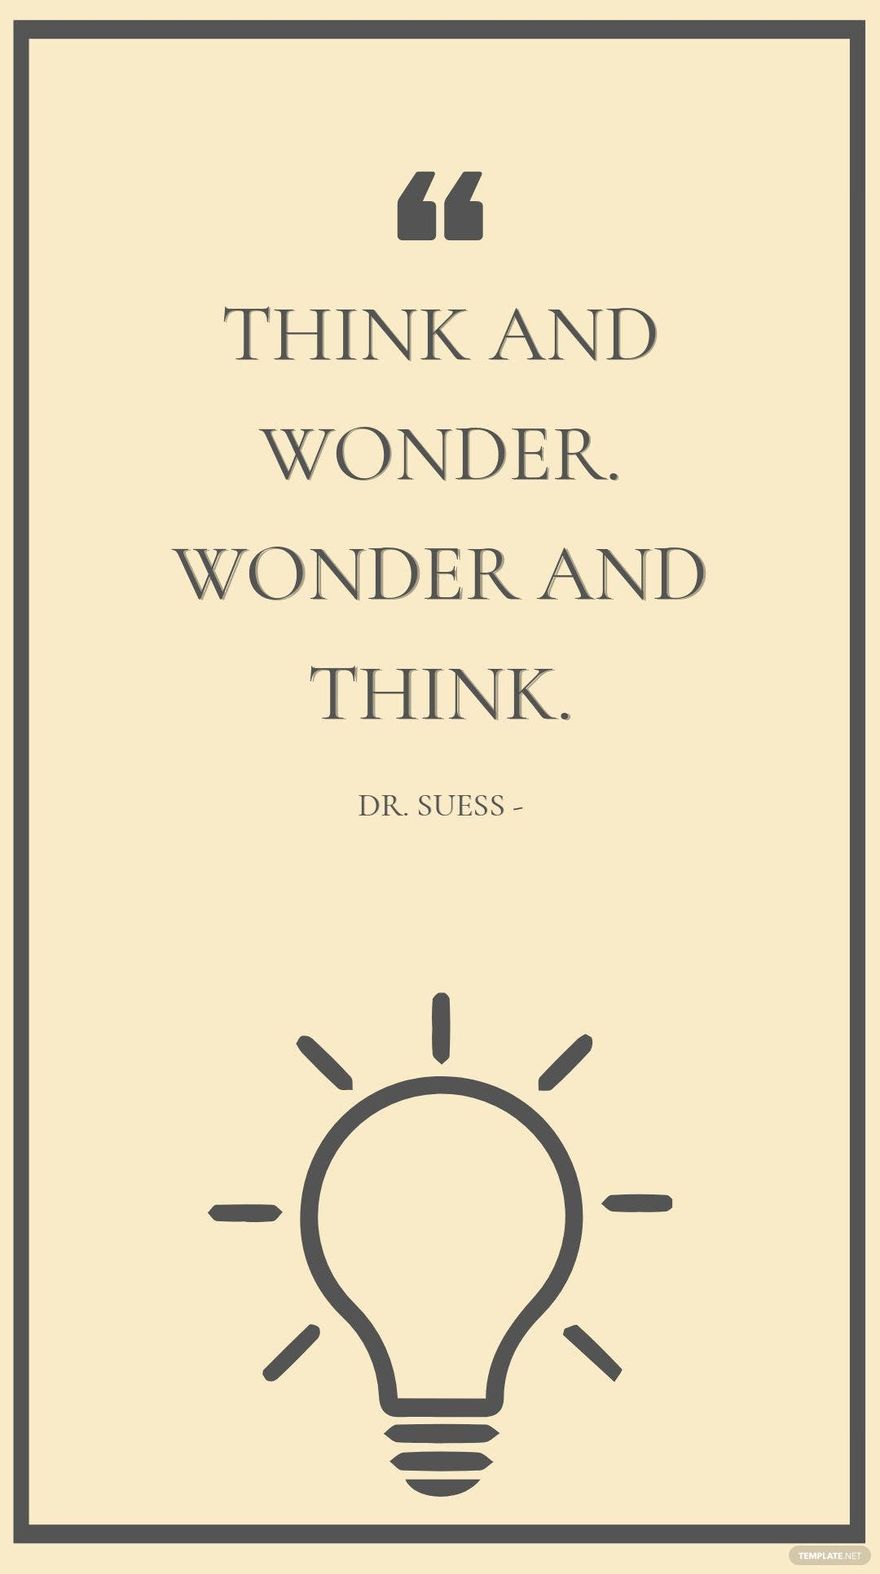 Dr. Suess - Think and wonder. Wonder and think.